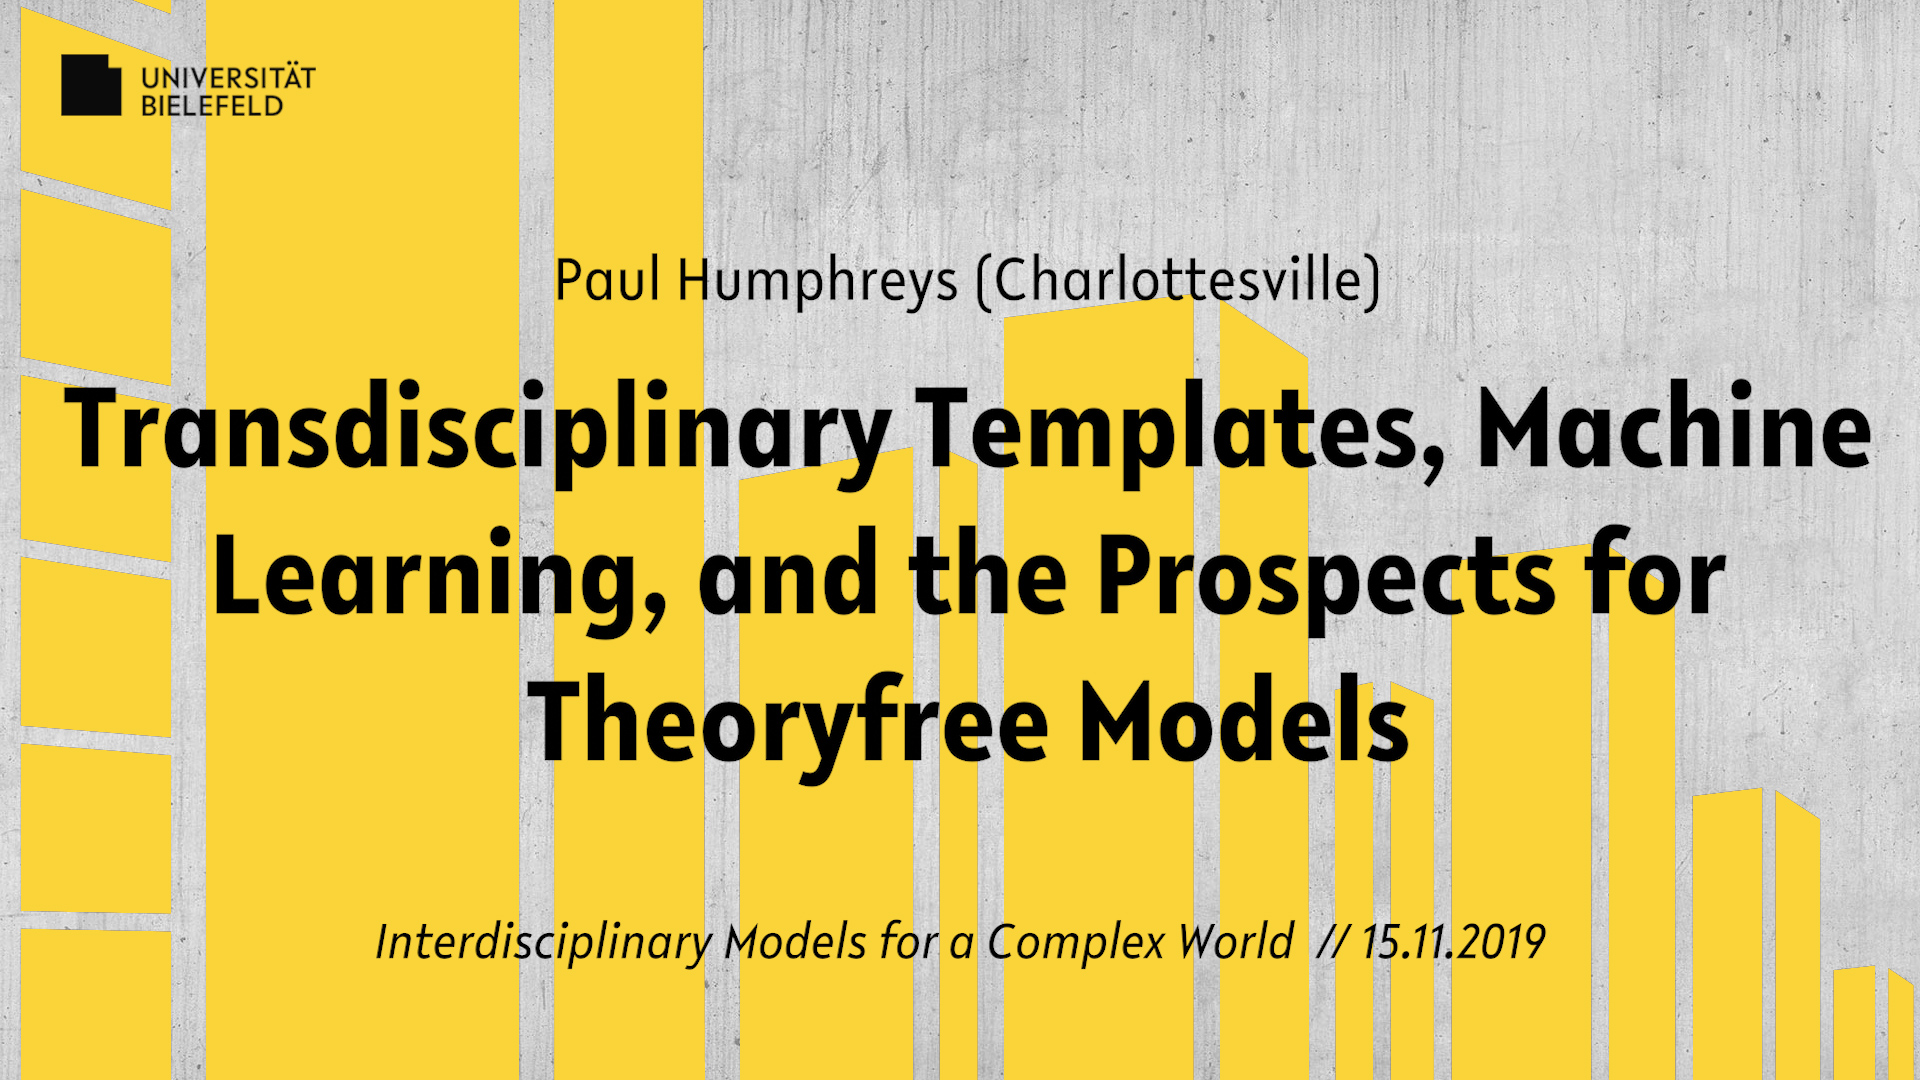 Transdisciplinary Templates, Machine Learning, and the Prospects for Theory-free Models